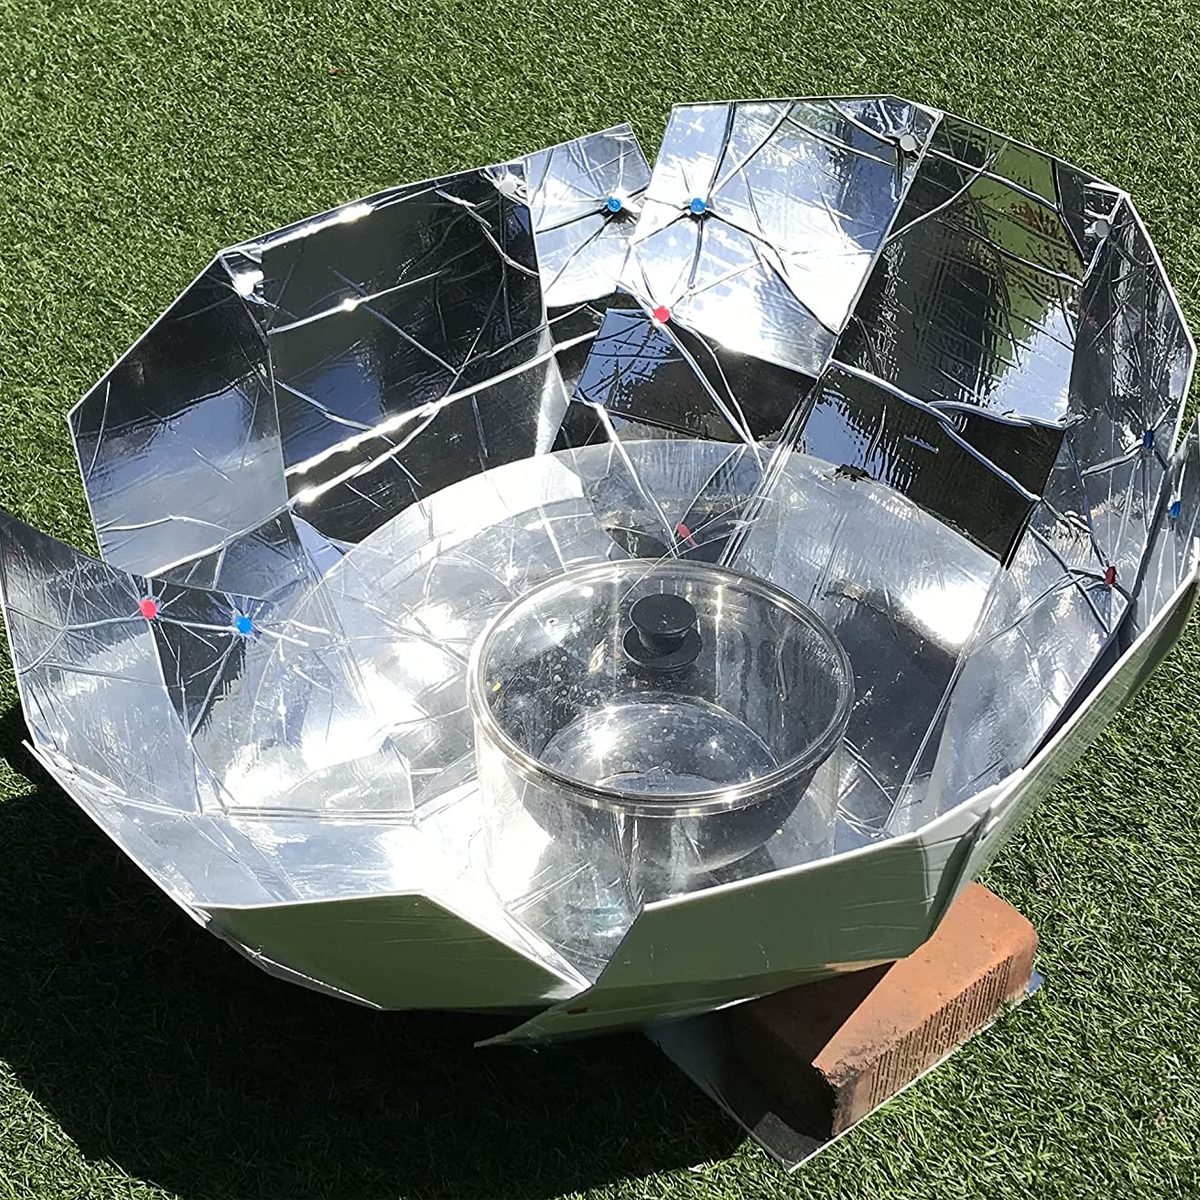 Sunflair Portable Solar Oven Deluxe with Complete Cookware, Dehydrating  Racks and Thermometer